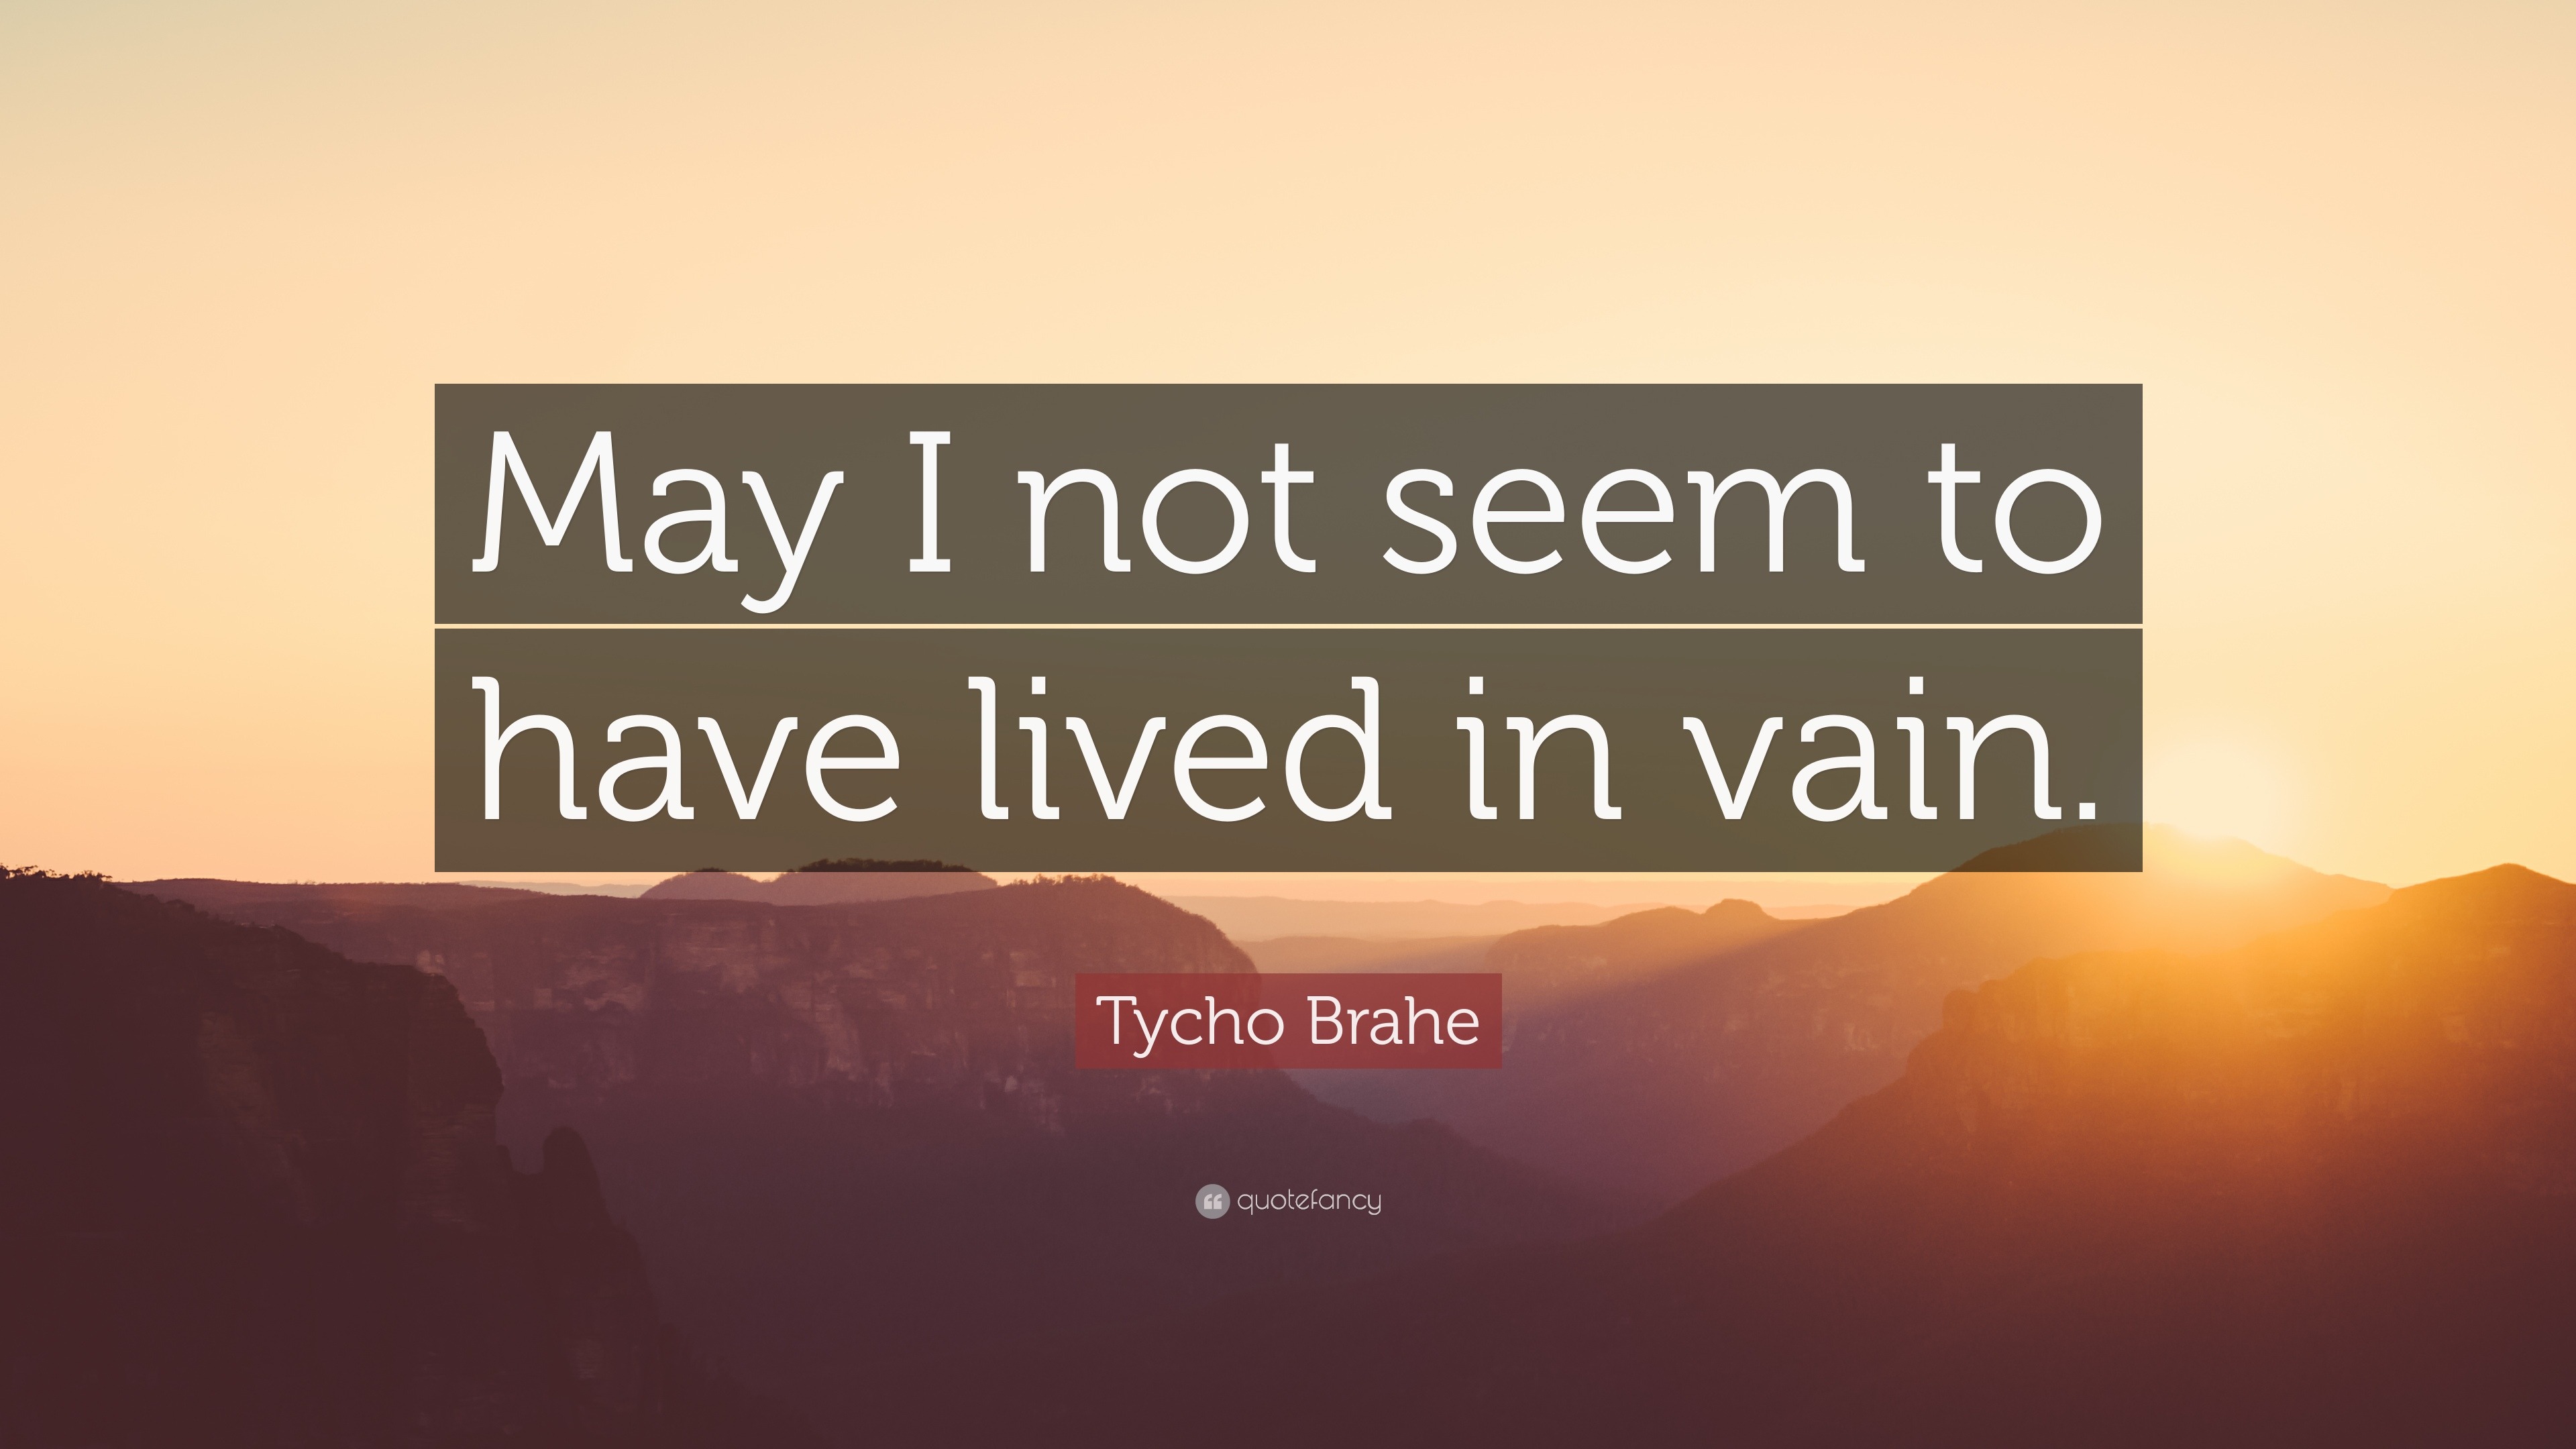 Tycho Brahe Quote: "May I not seem to have lived in vain." (7 wallpapers) - Quotefancy